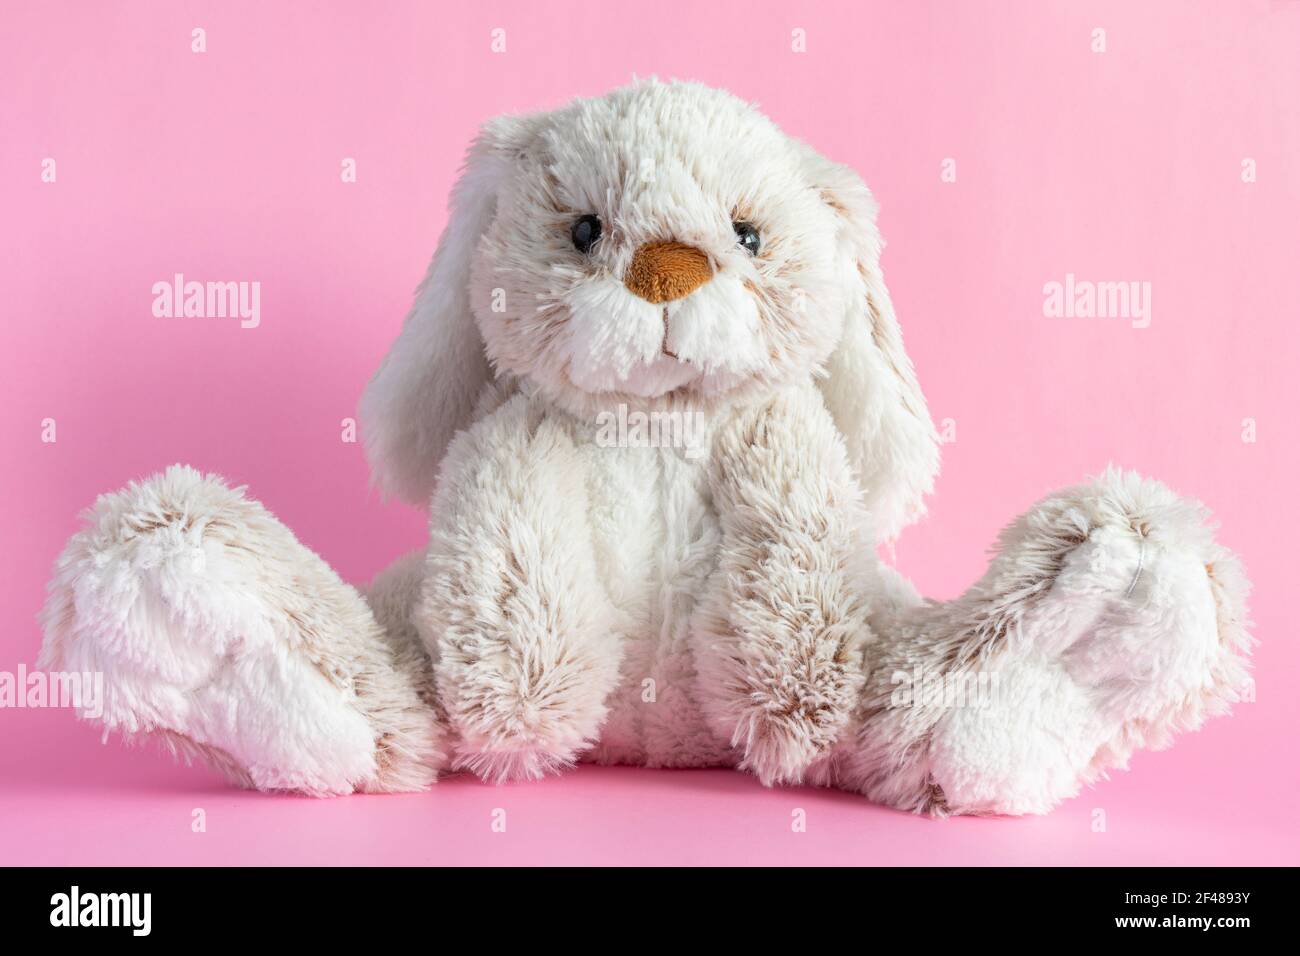 Stuffed bunny on pink background. Easter concept. Cute toy bunny sitting on colored background. Stock Photo